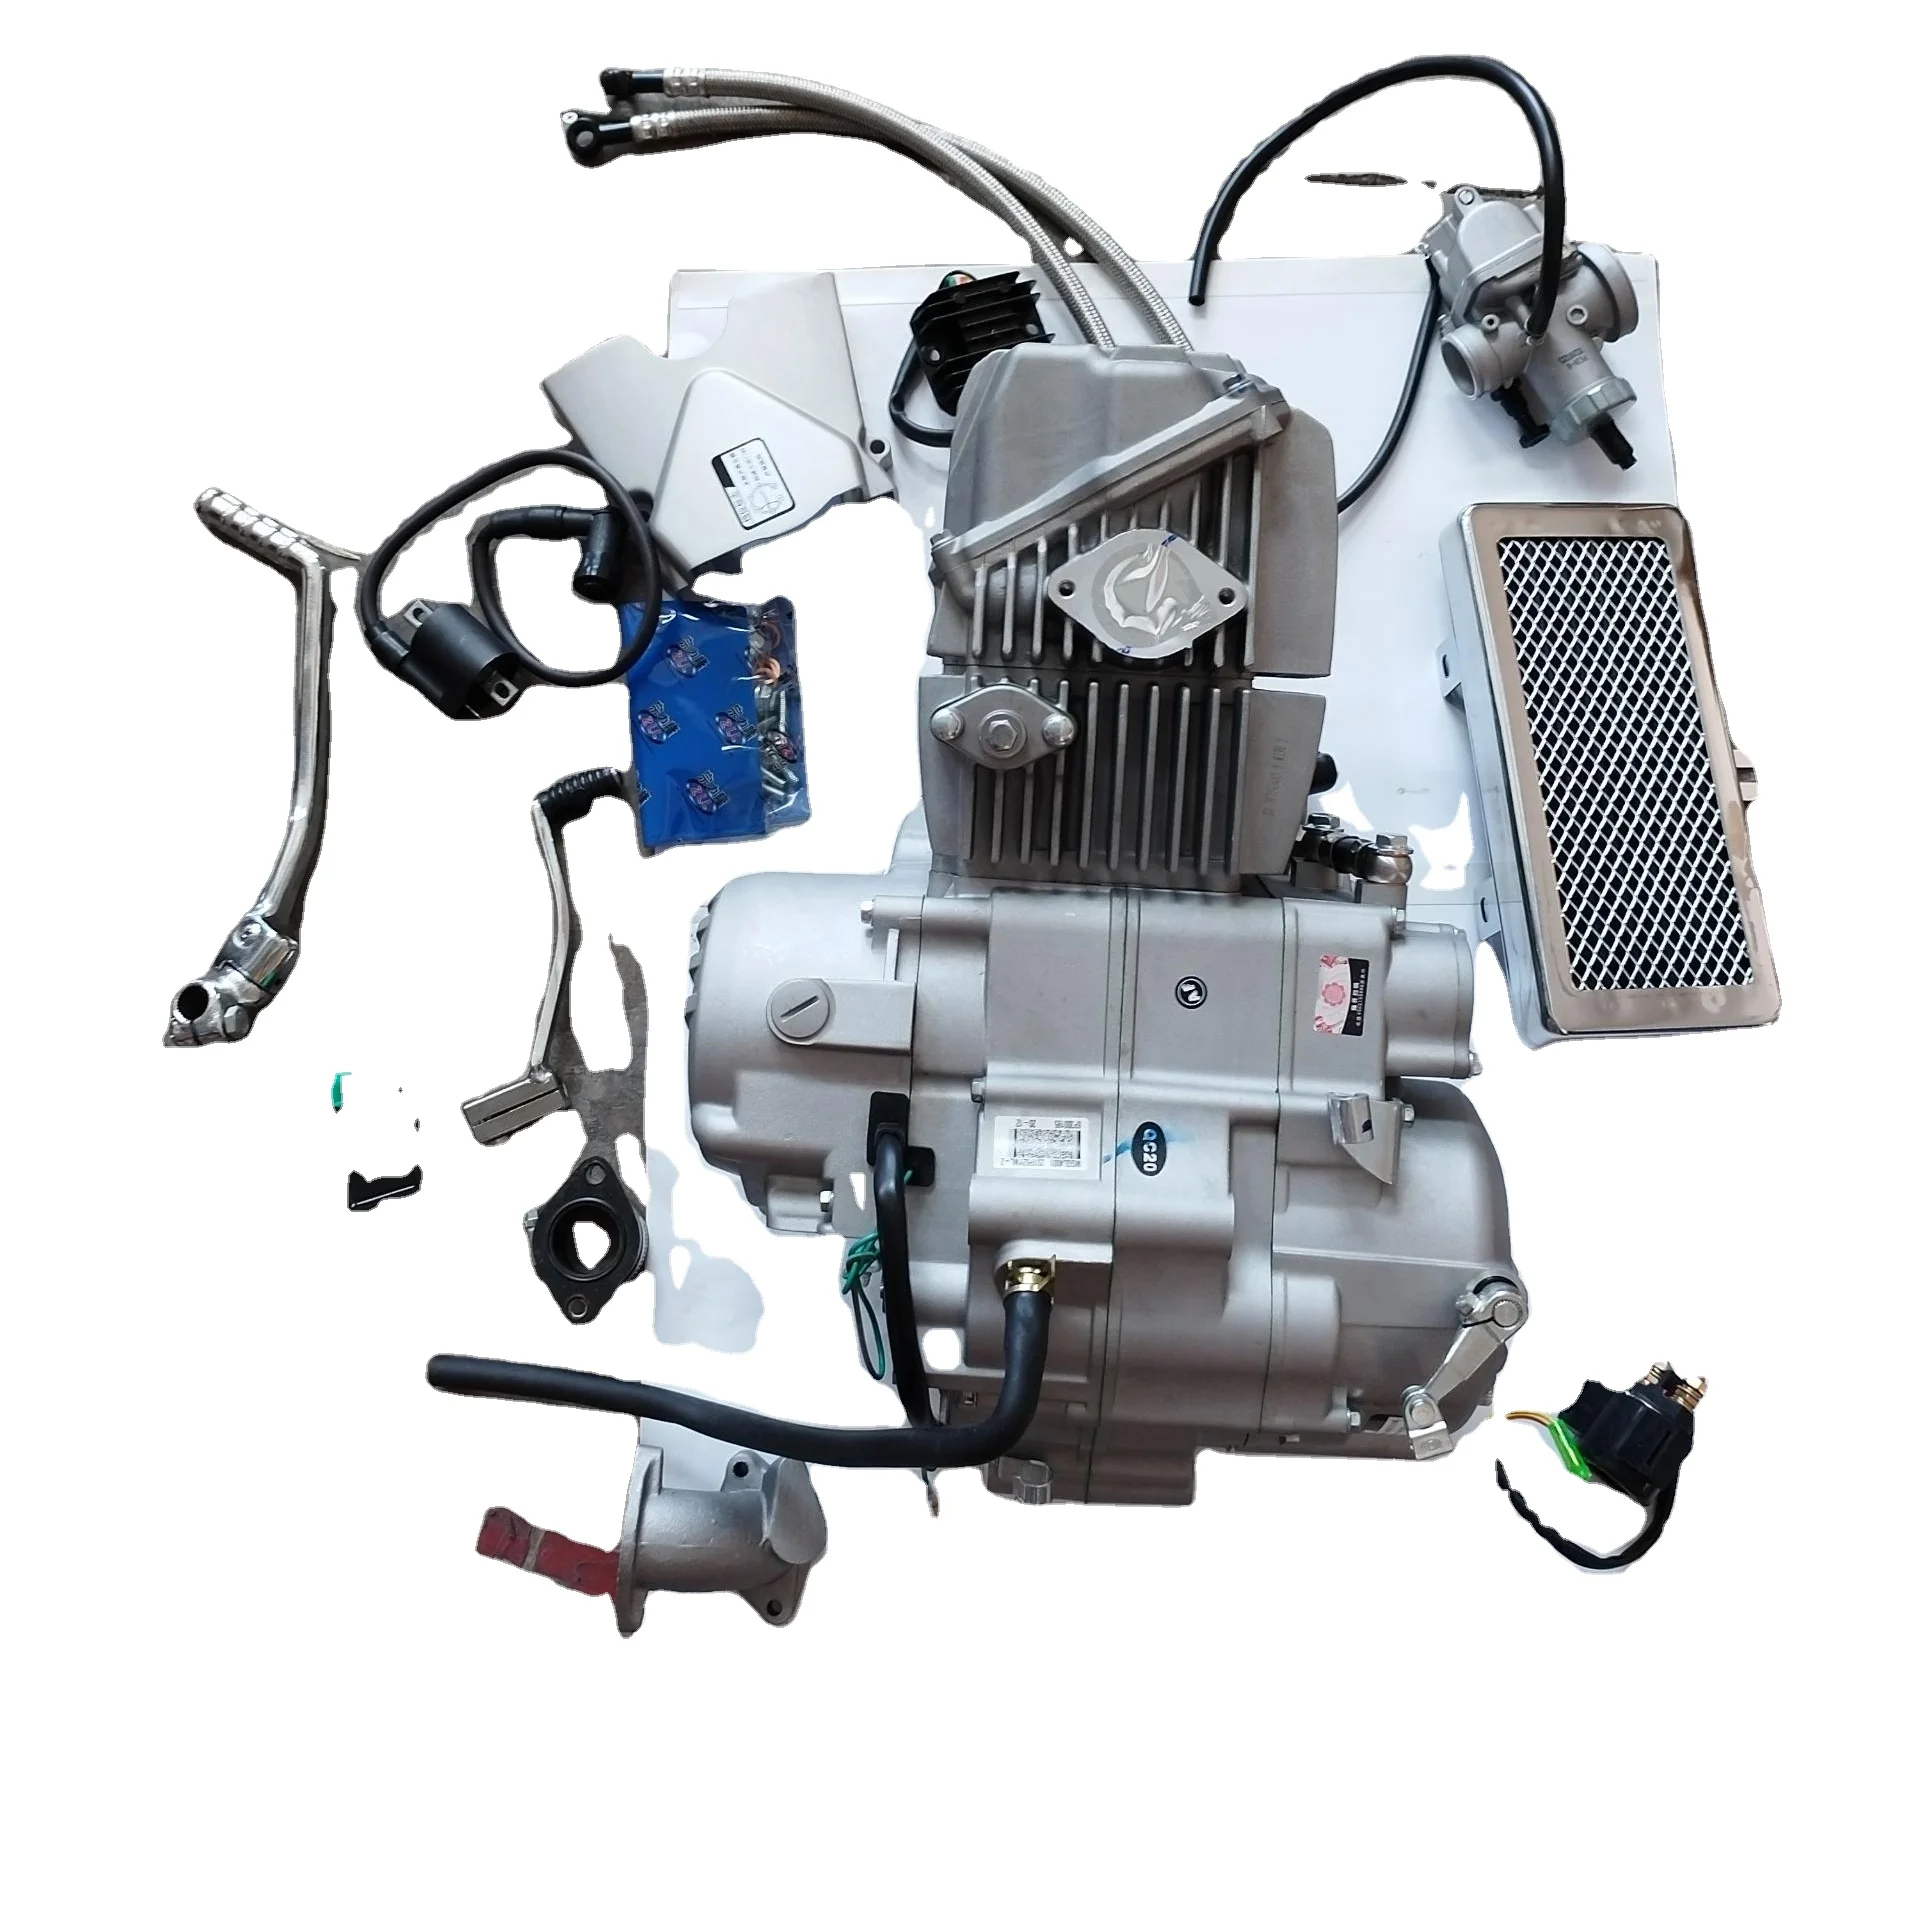 

zs190 motorcycle engine assembly Complete Motorcycle Engine 2 valve 4 stroke zongshen 190cc engine ZS1P62YML-2